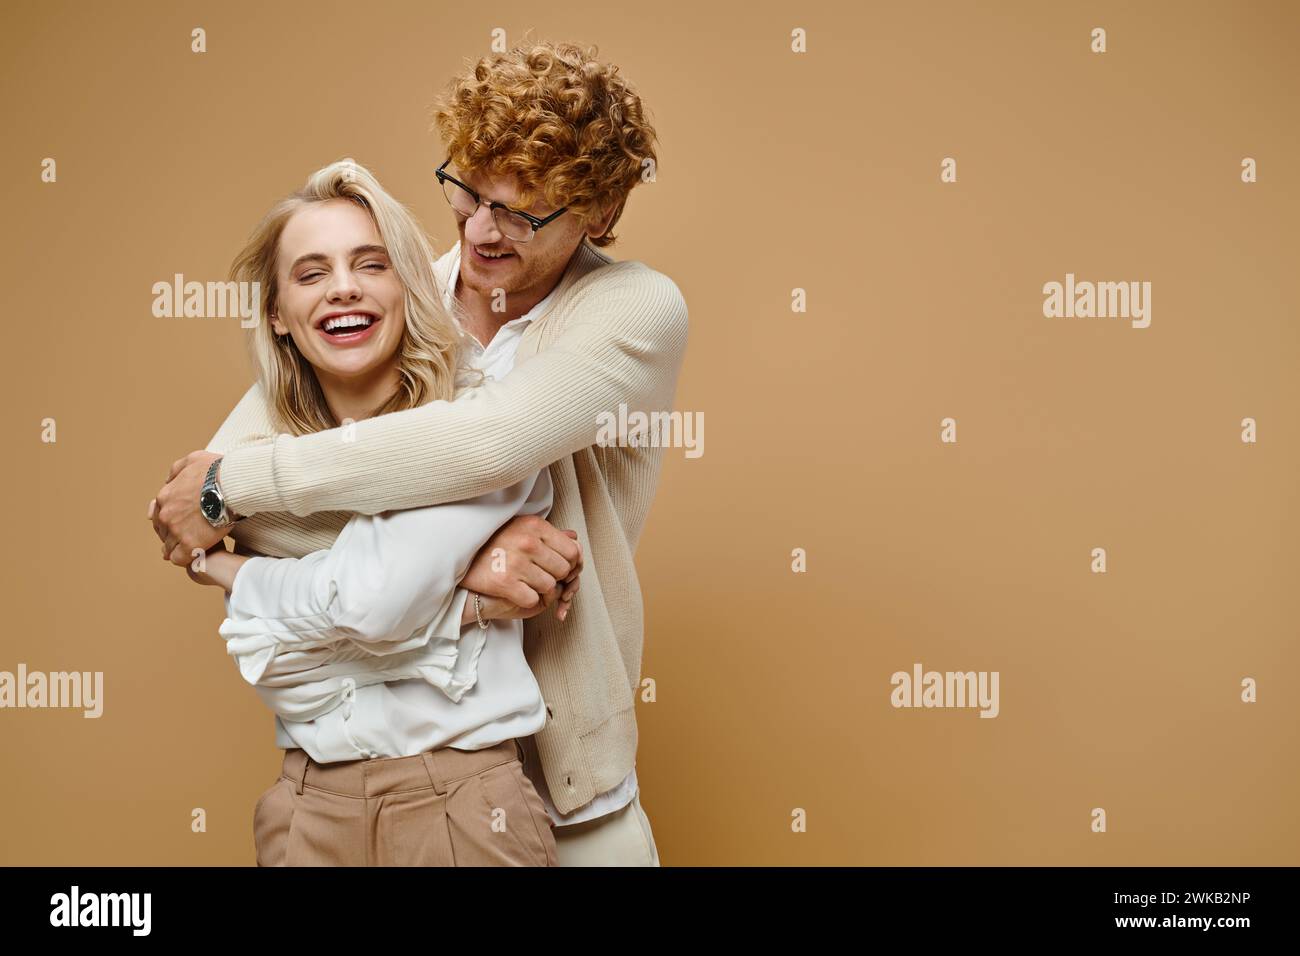 smiling redhead man in eyeglasses hugging blonde stylish woman laughing on beige, old money style Stock Photo